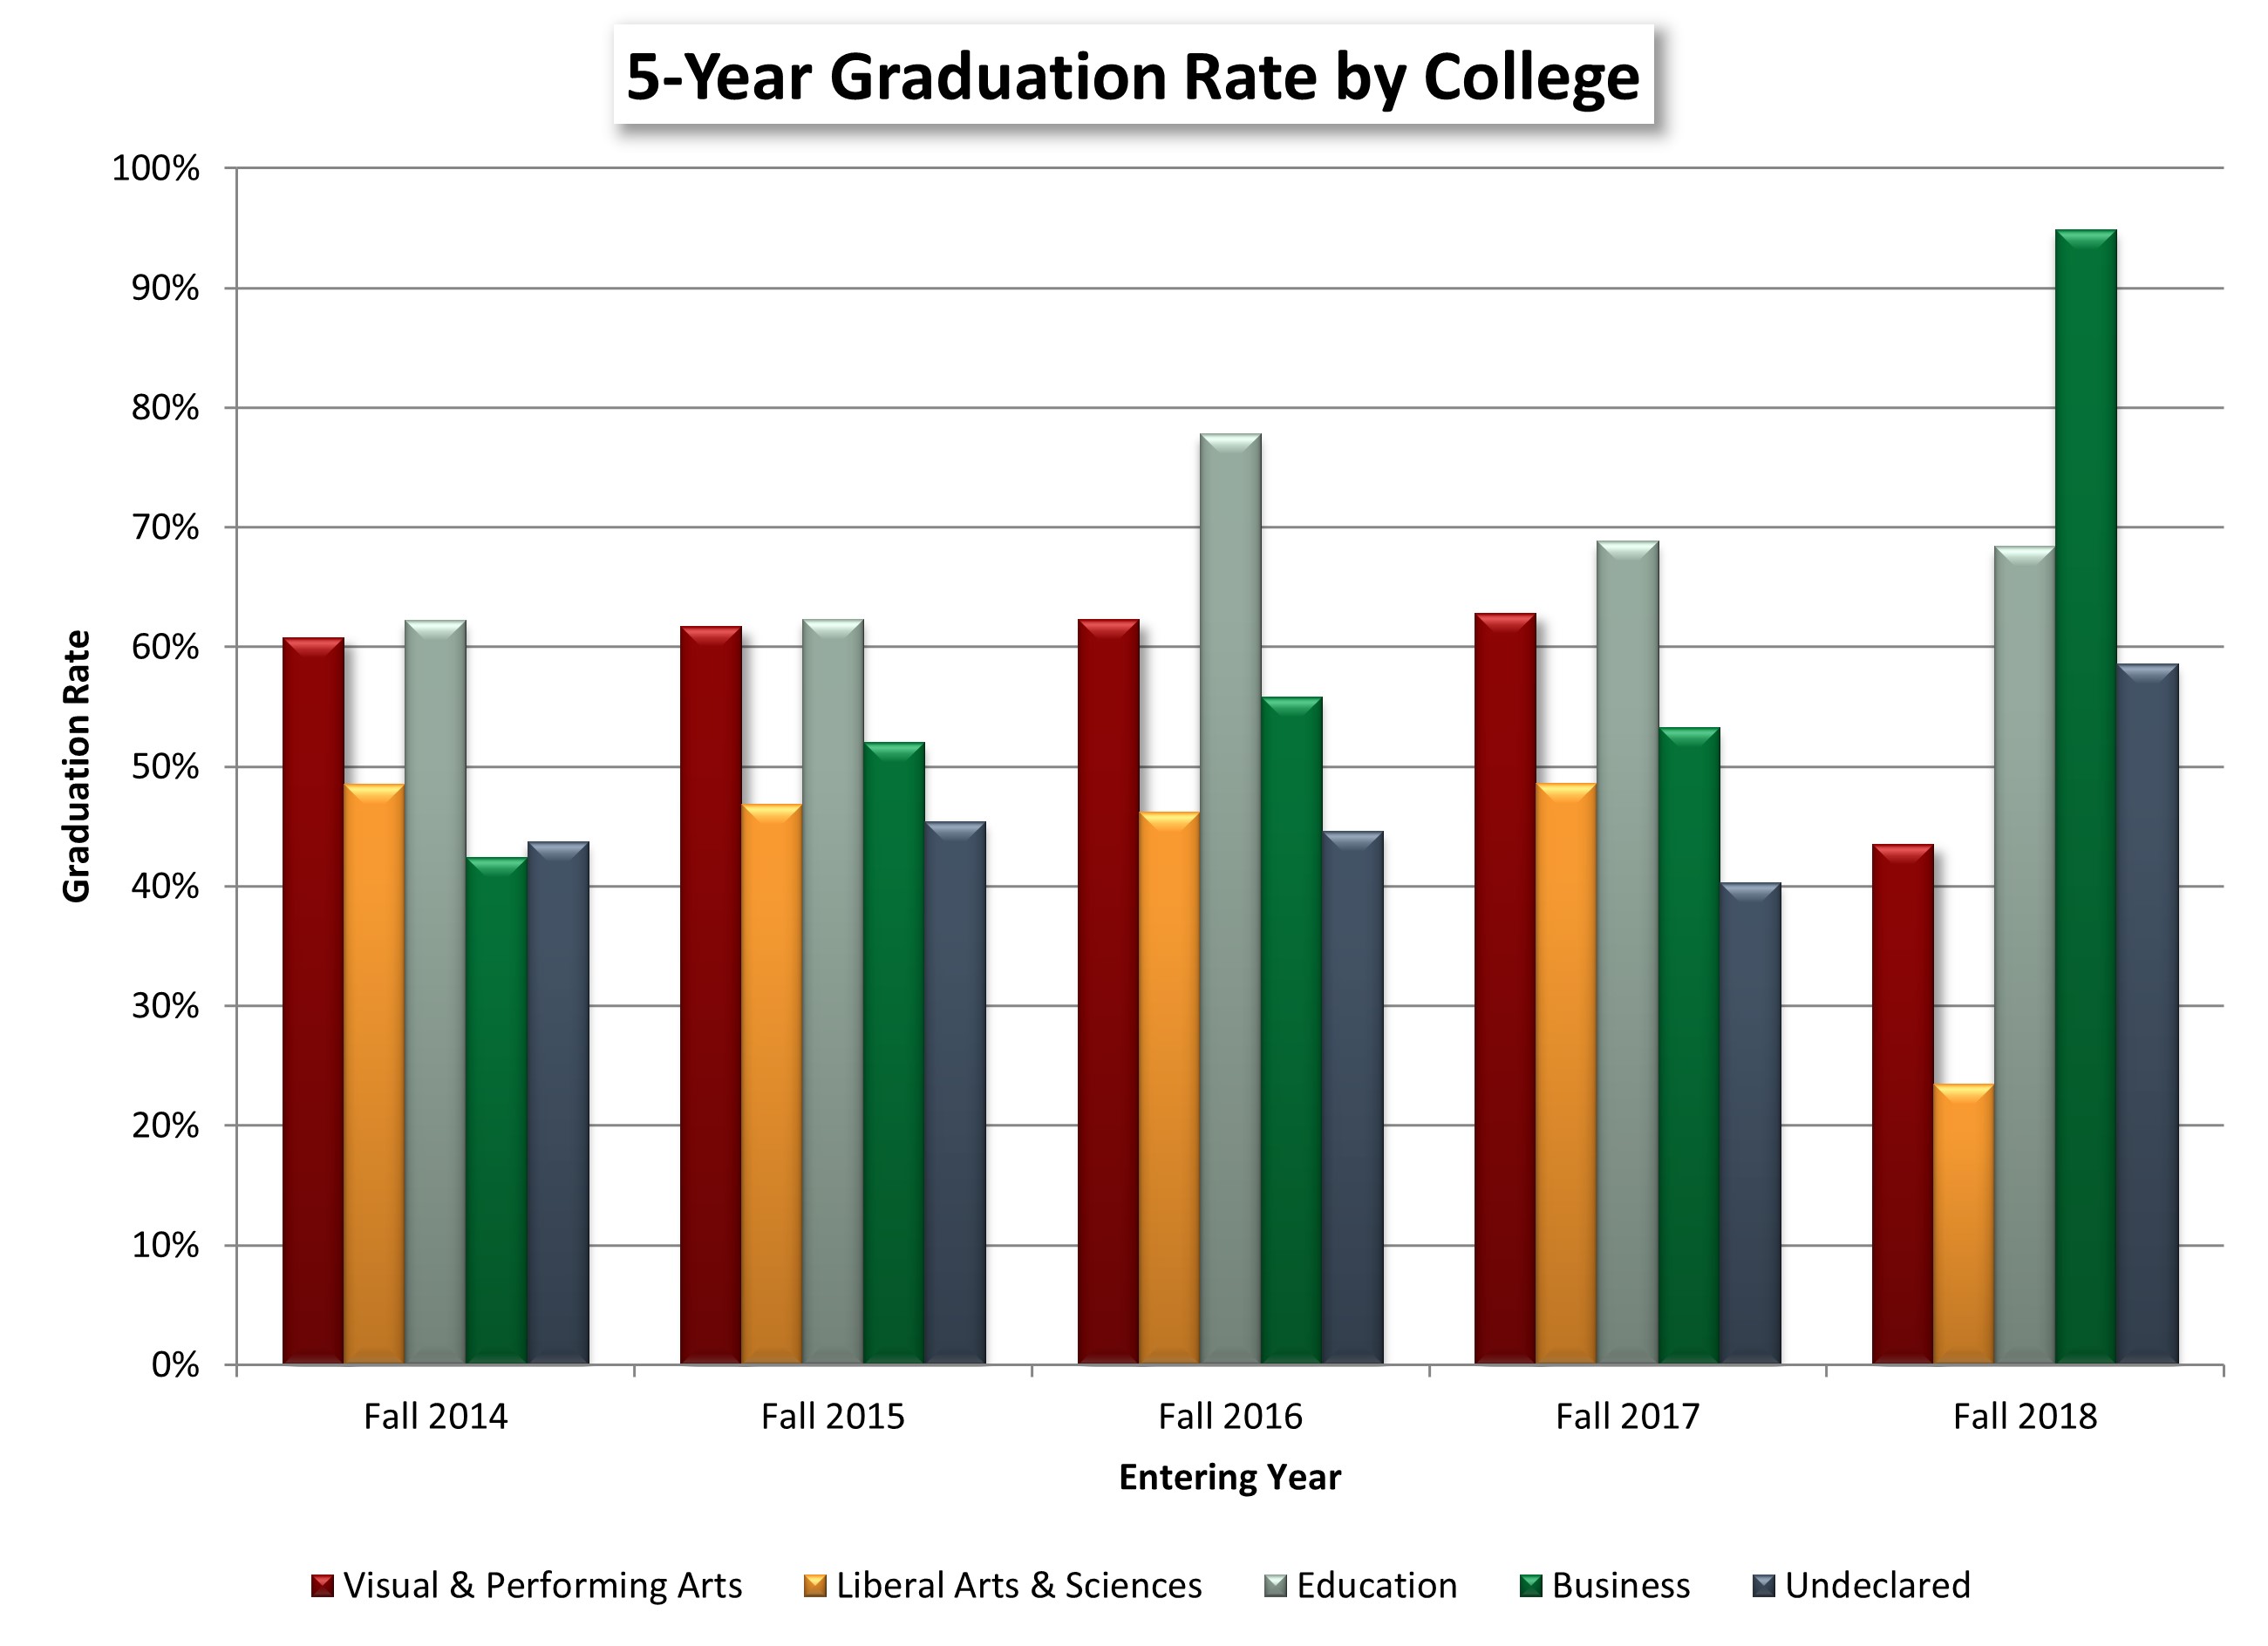 5-Year Graduation Rate by College chart